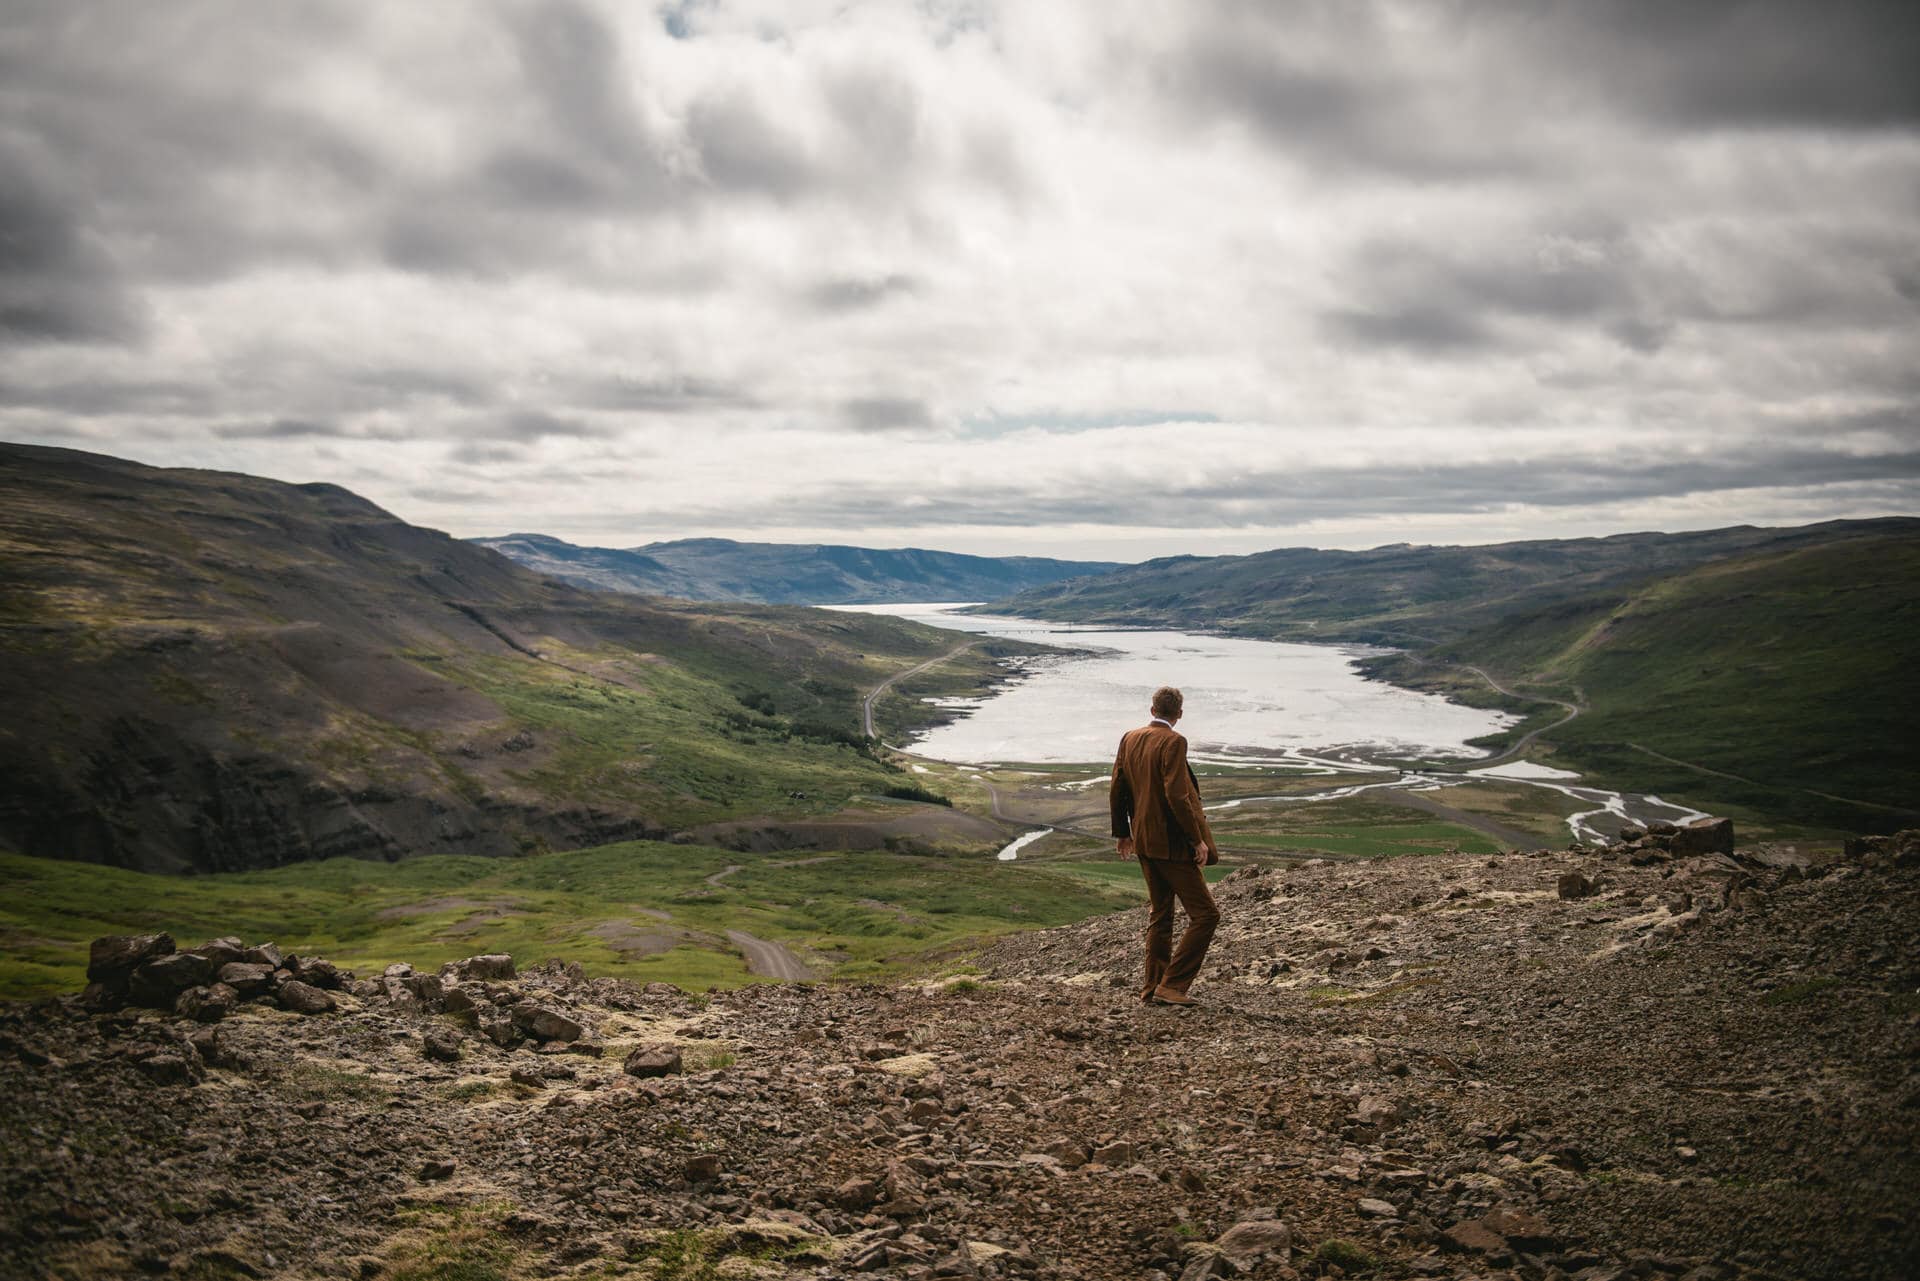 Captured from behind, the groom stands against the stunning backdrop of the Westfjords, a symbol of his upcoming Iceland elopement adventure.